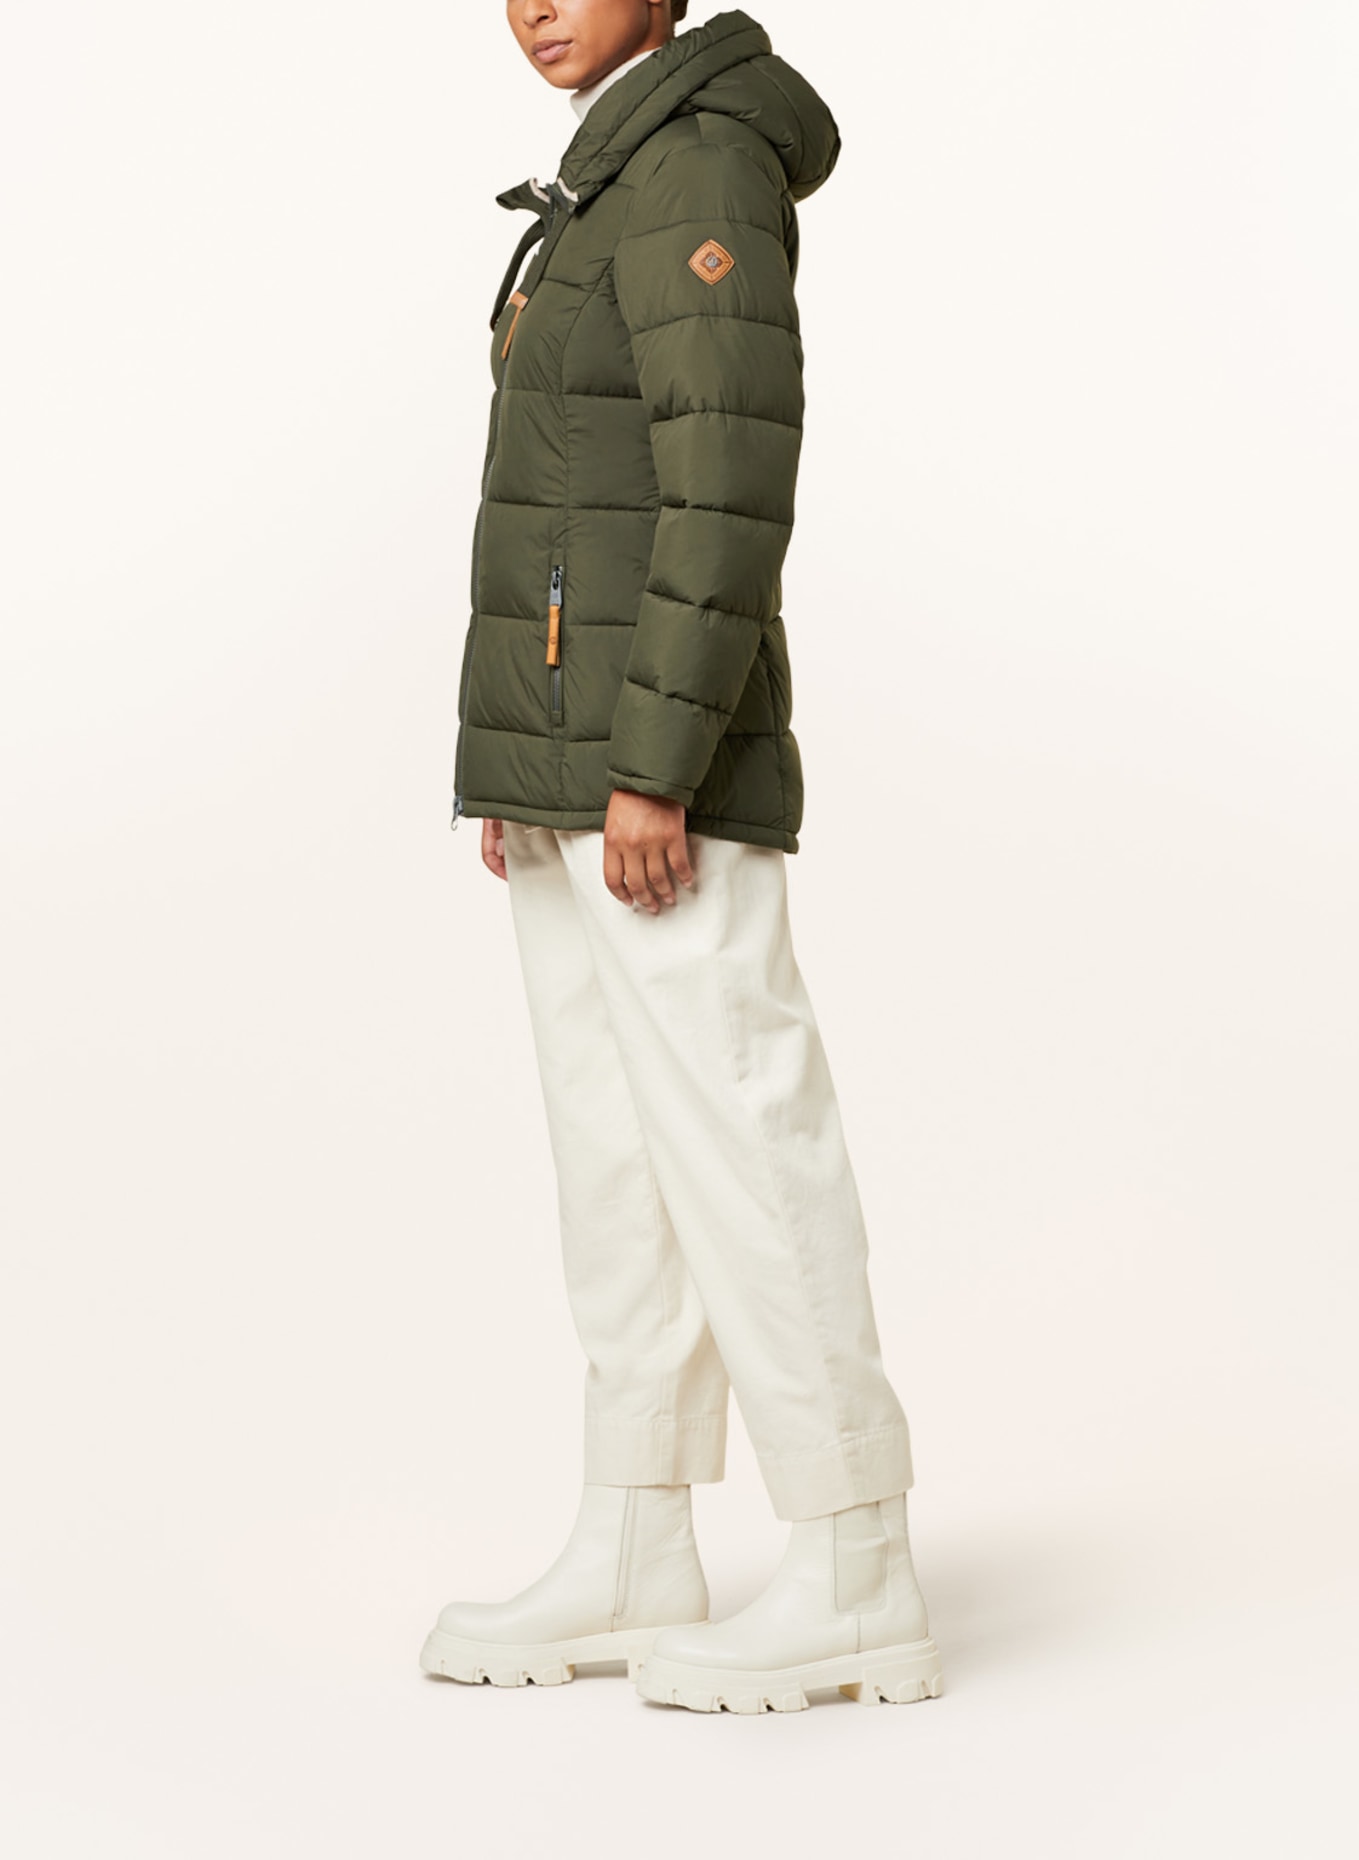 G.I.G.A. DX by killtec Quilted olive jacket in